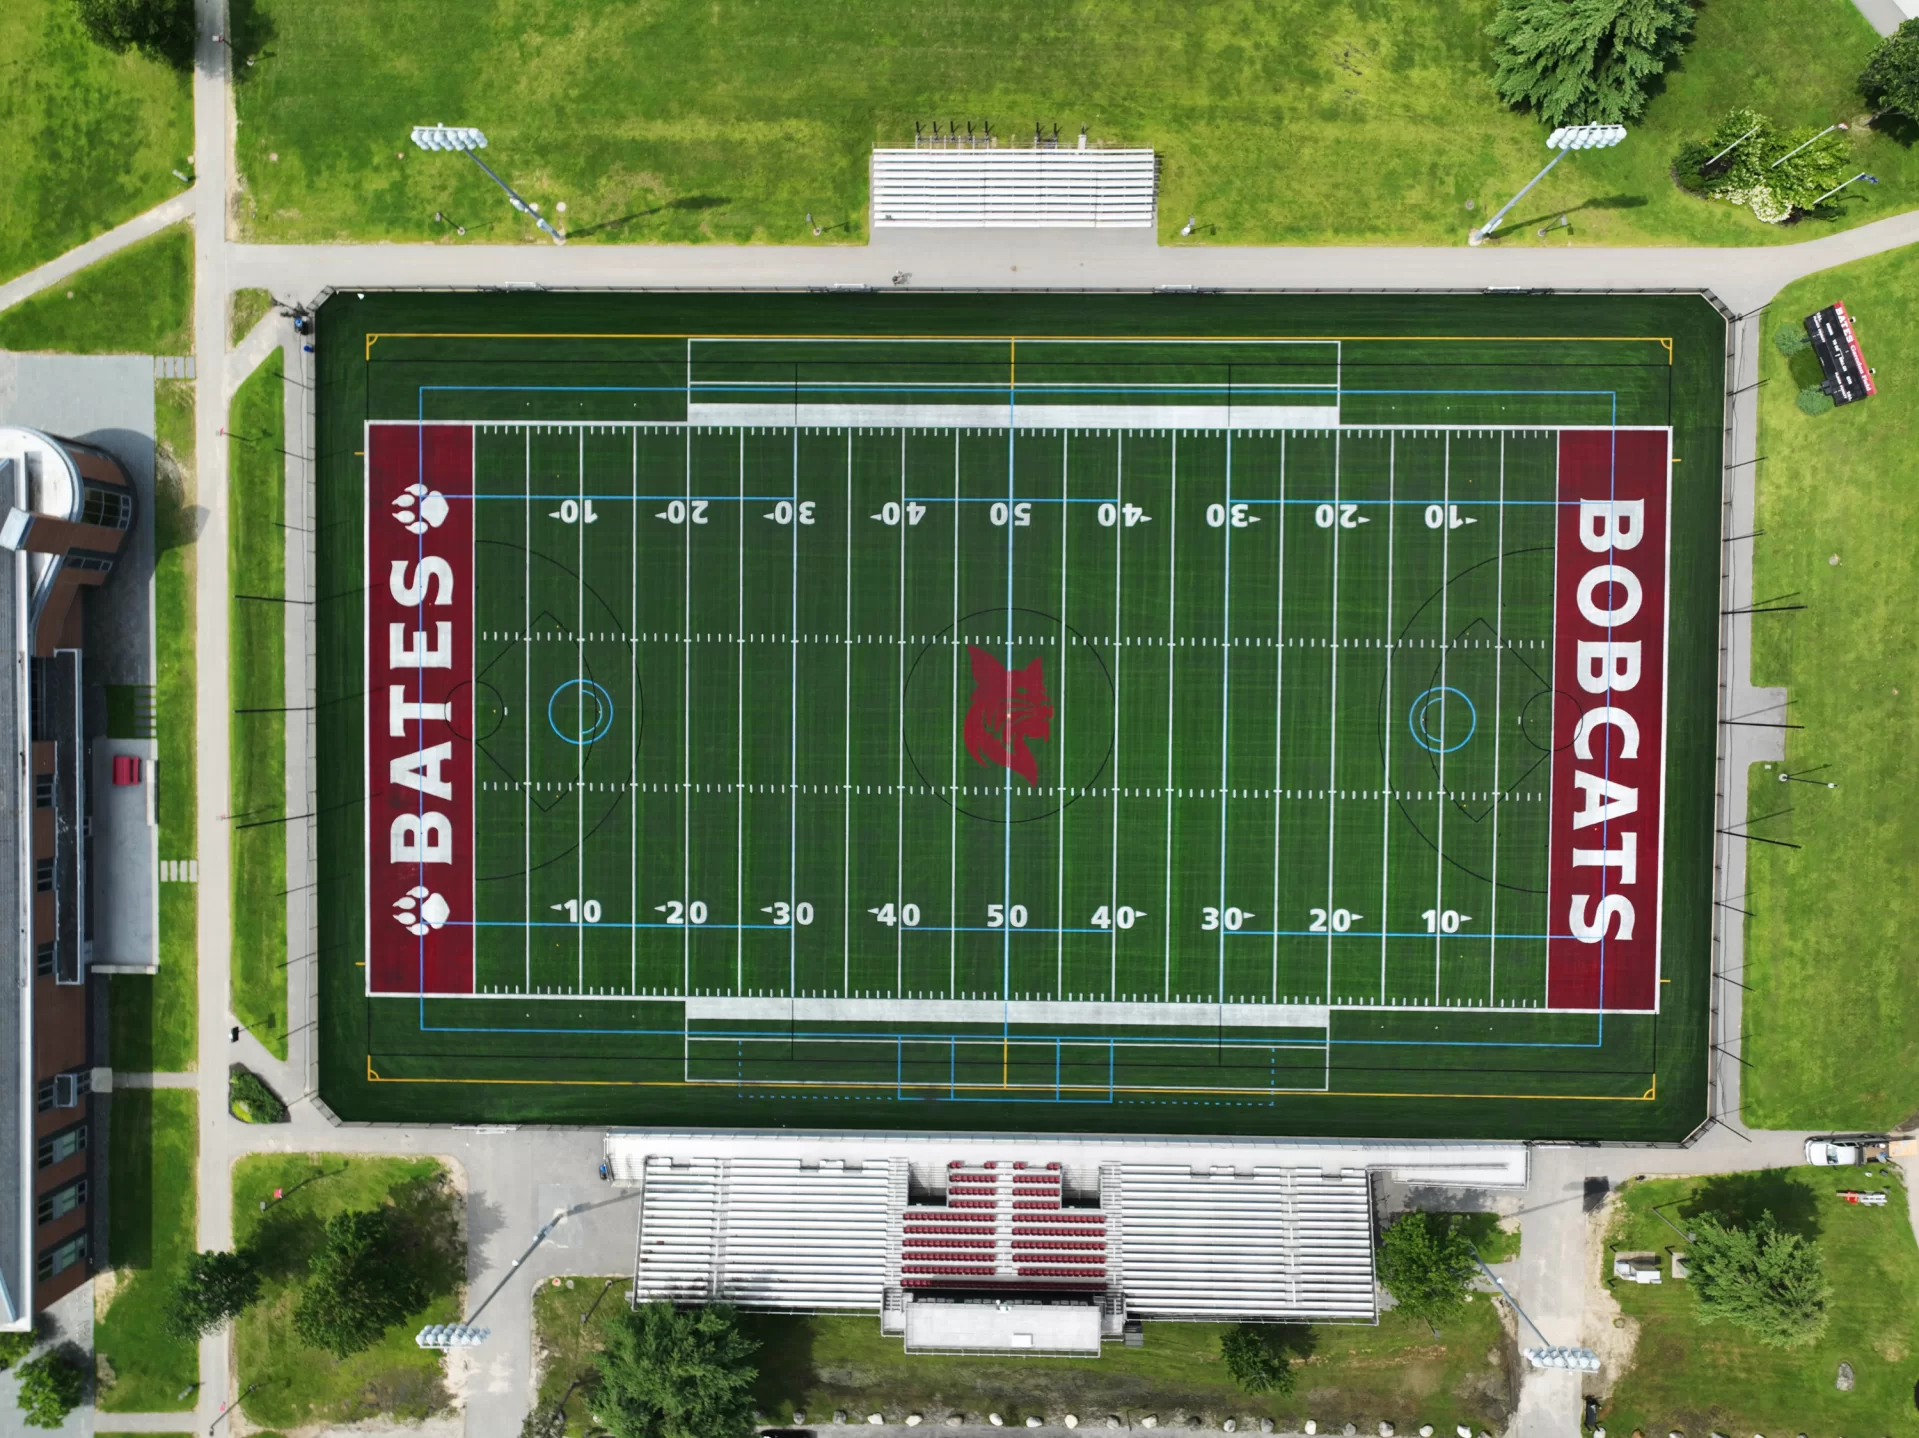 Drone shot of Garcelon Field shot on August 3, 2023. Pilot:
Rush, Branden F.

brush@bates.edu

Sr. Academic Technology Consultant - VR/AR & 3D Technologies
Information & Library Services
207-753-6980
Coram Library, Room 103C

(Theophil Syslo | Bates College)